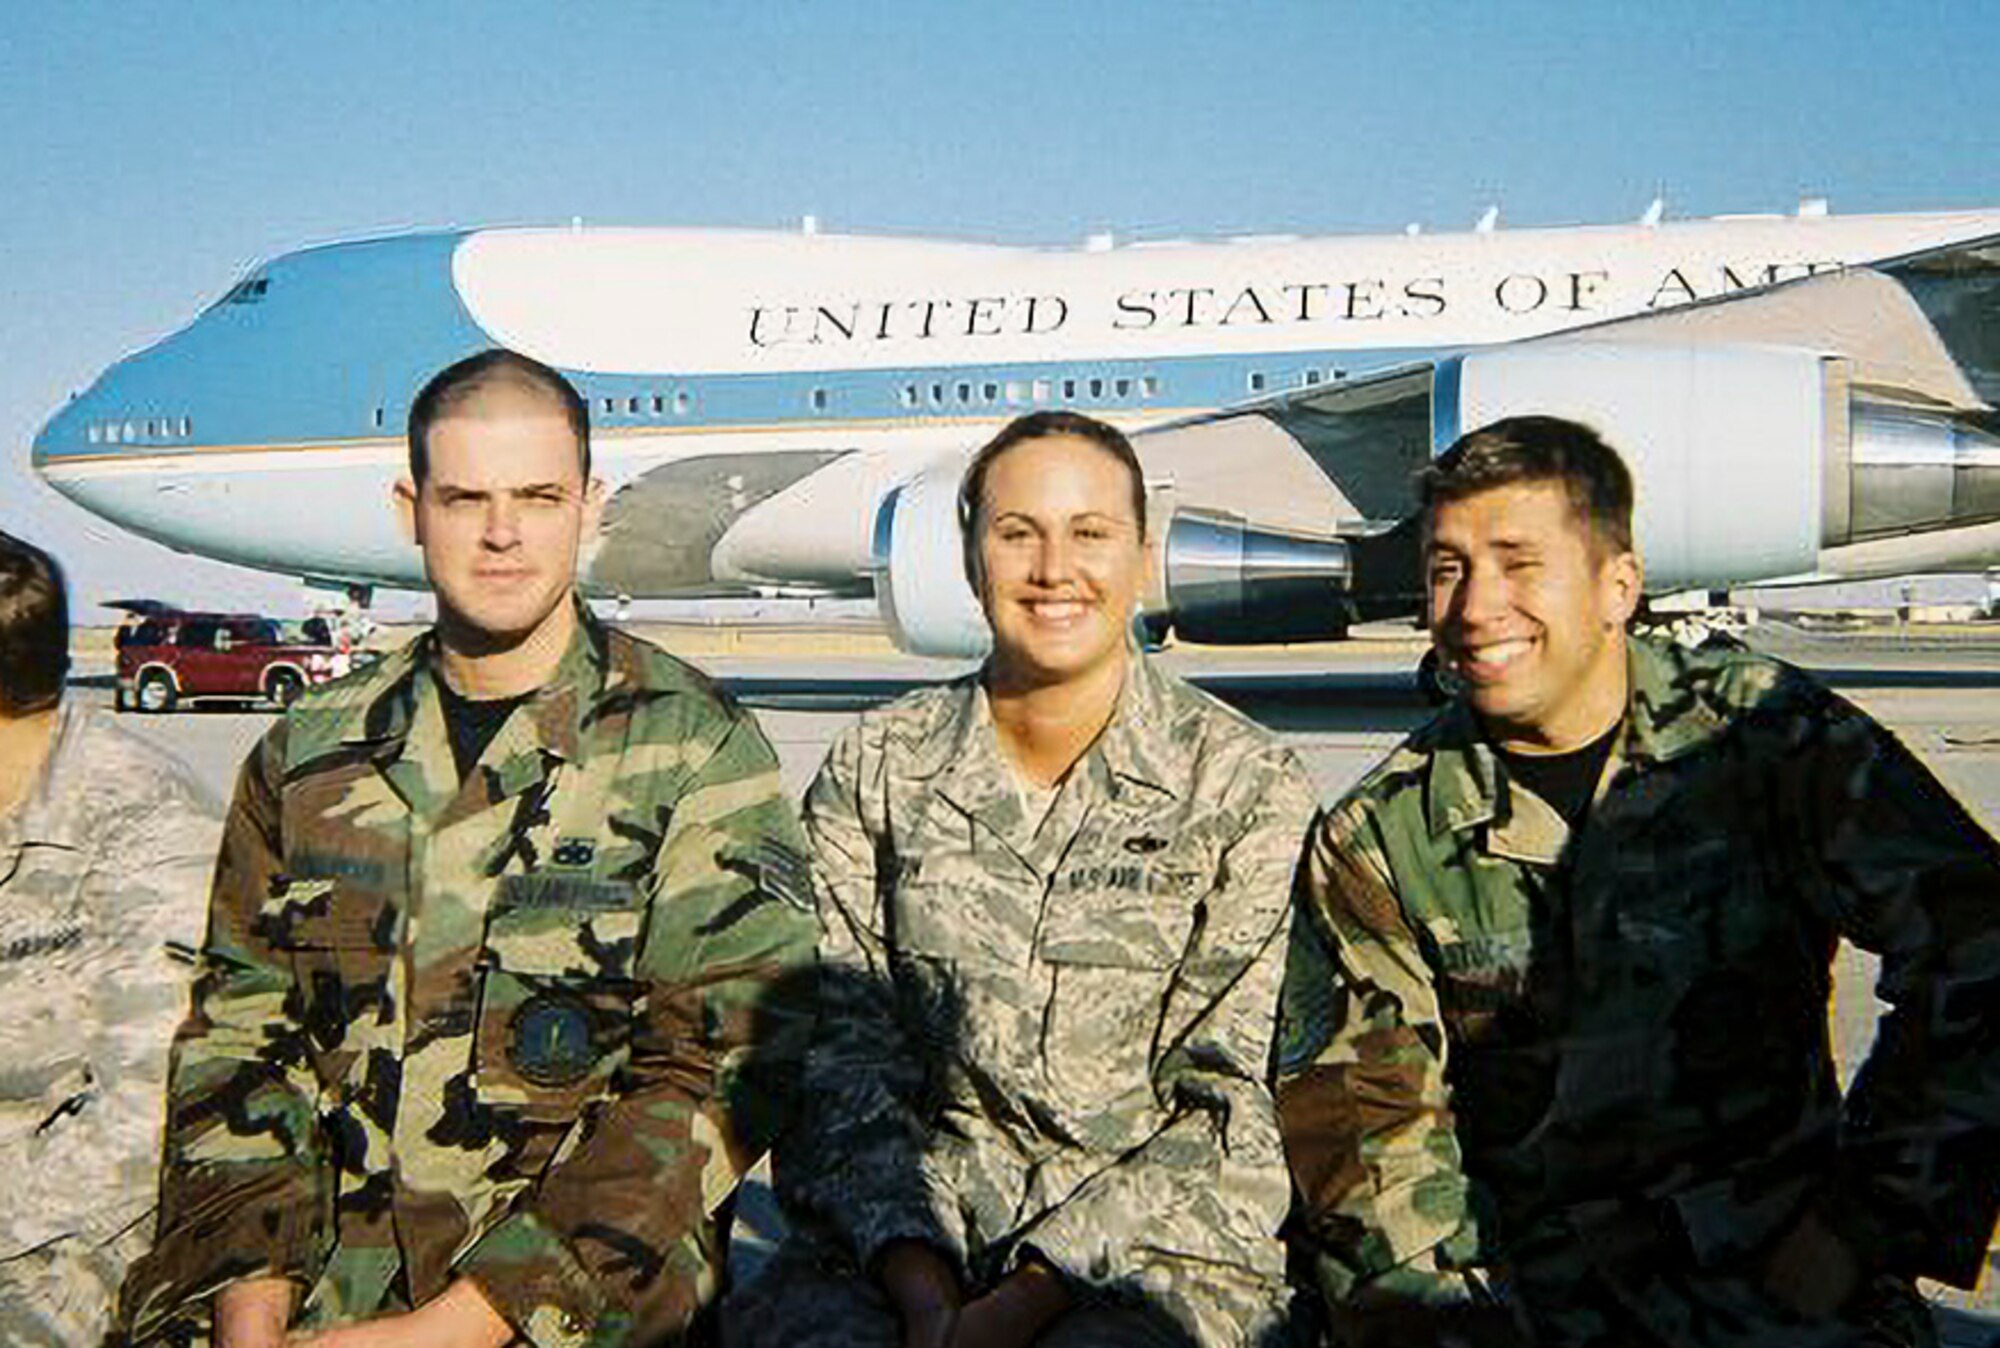 U.S. Air Force Senior Airman Jennifer Barger, 60th Aircraft Maintenance Squadron crew chief (center), sits with other maintenance Airmen as they pose for a picture in front of Air Force One when President George W. Bush visited Travis Air Force Base, California in 2005.